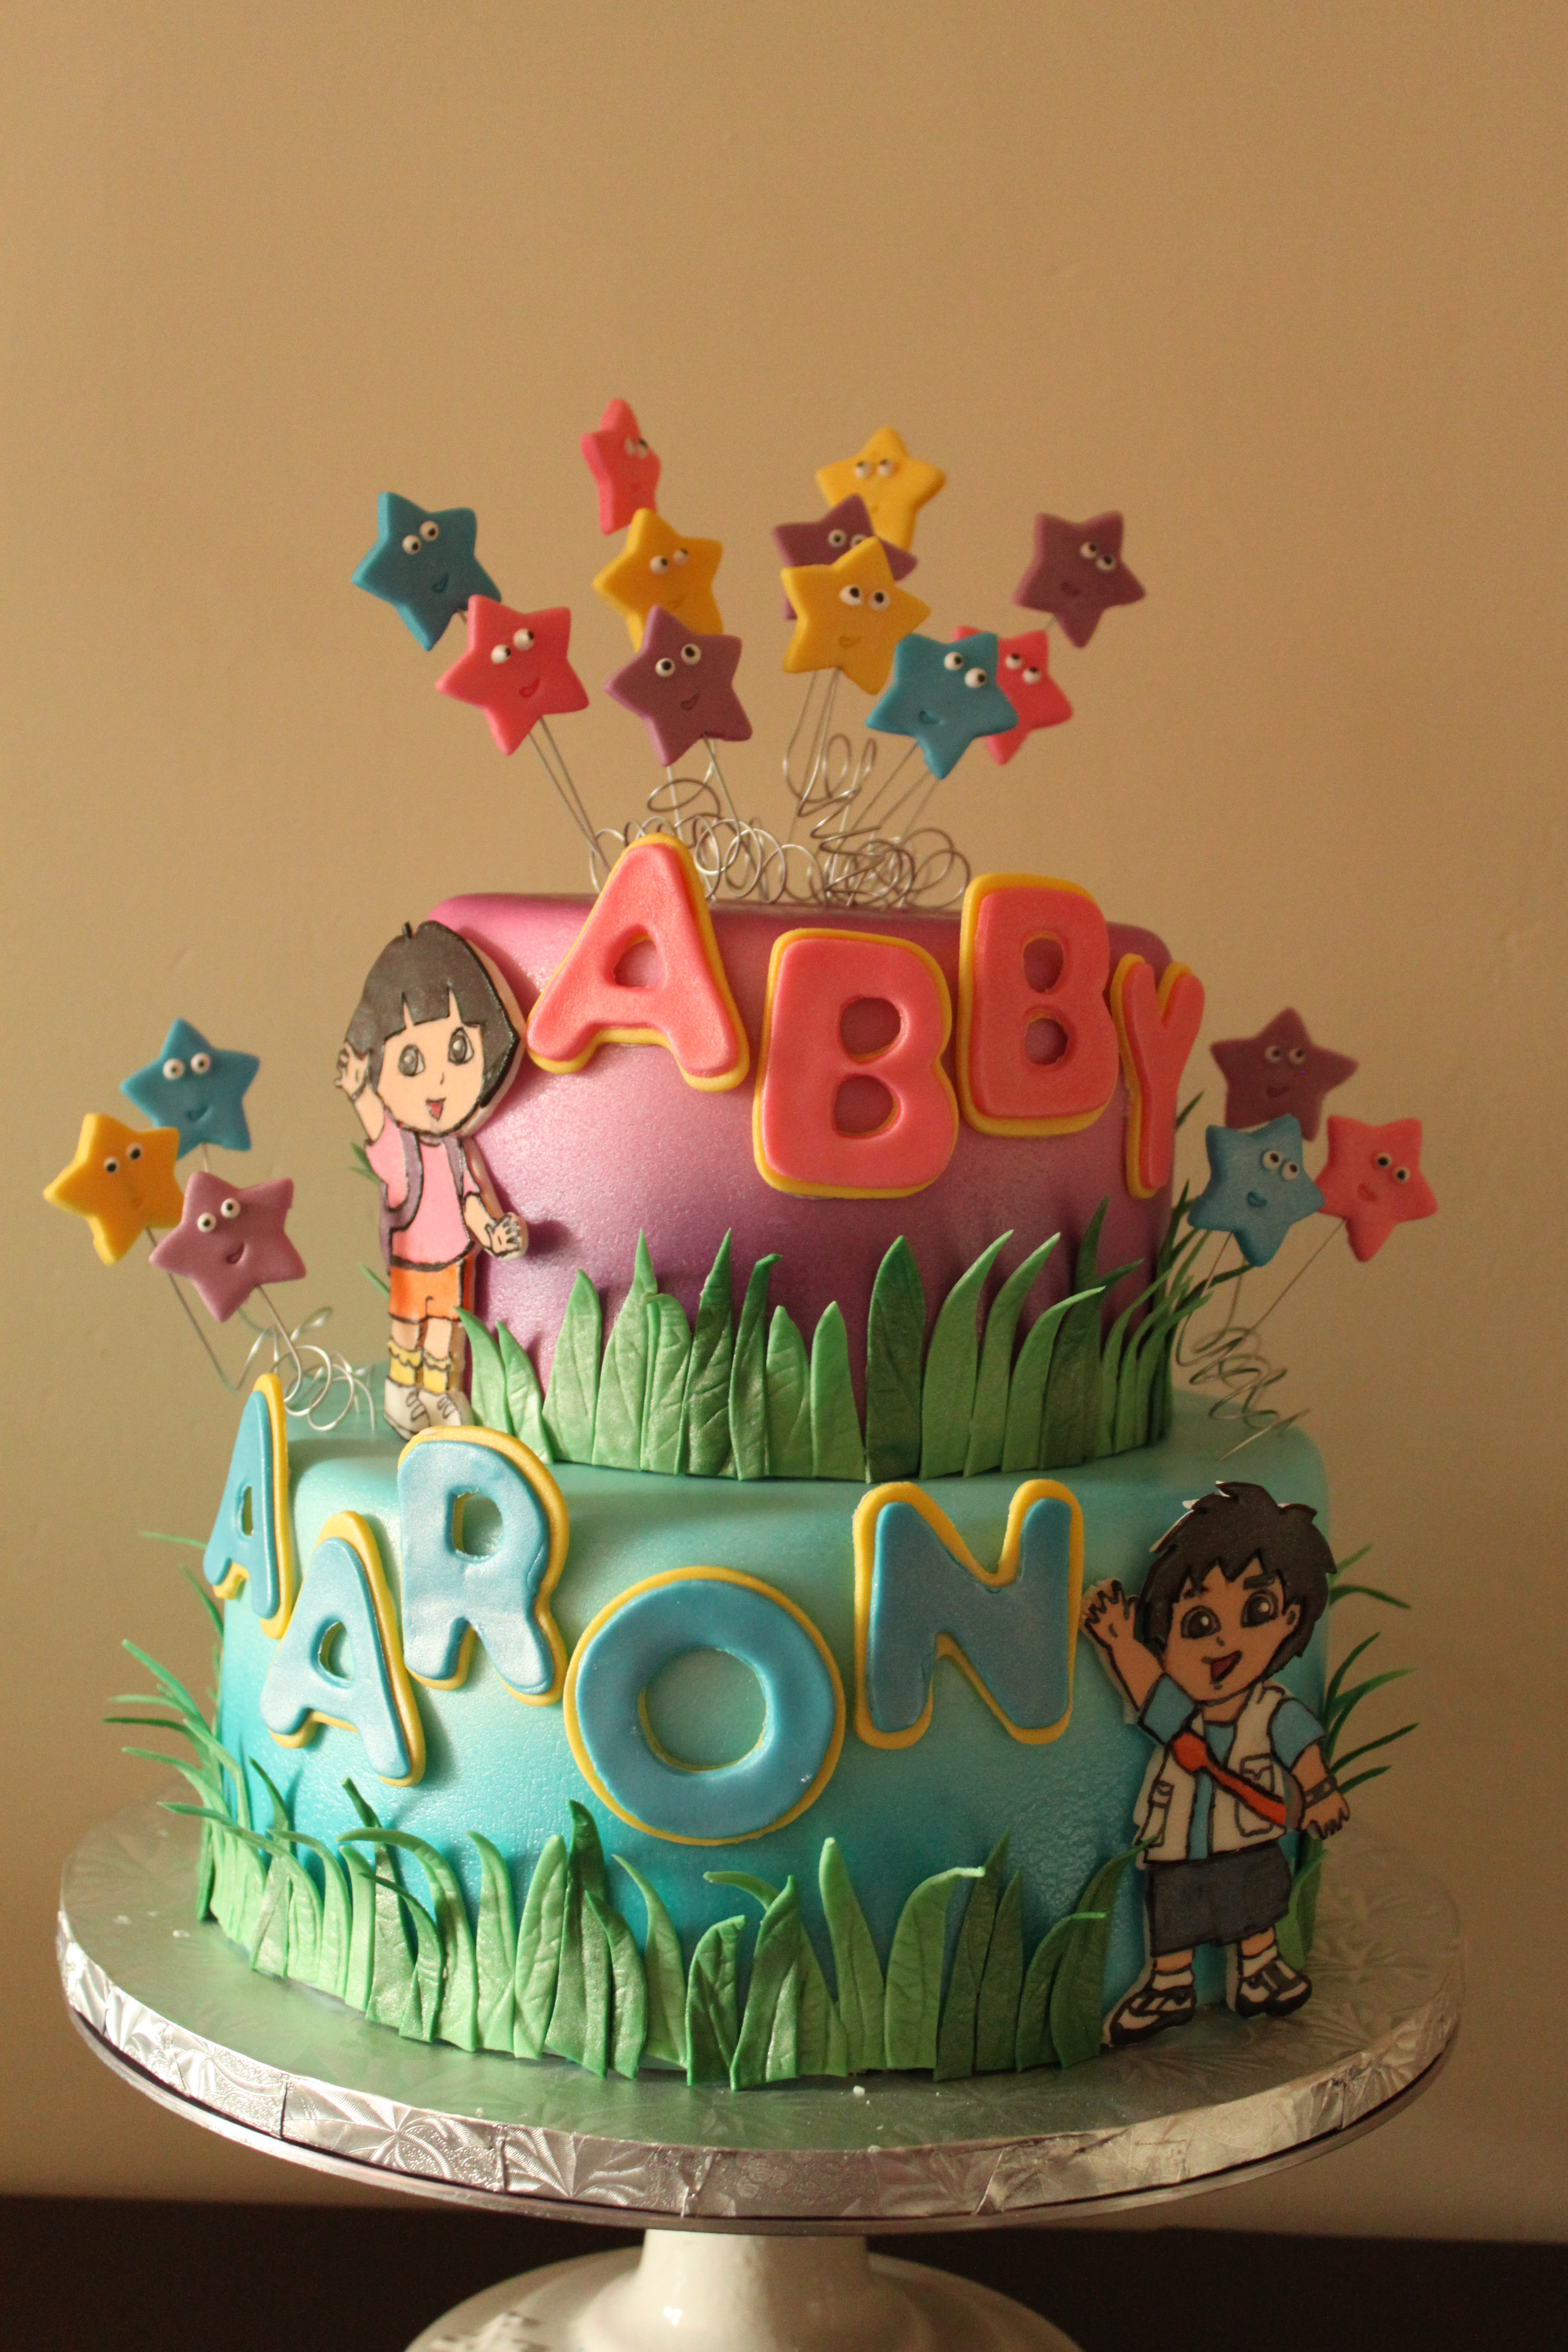 Stunning Compilation of Full 4K Dora Cake Images - Over 999 to Choose From!